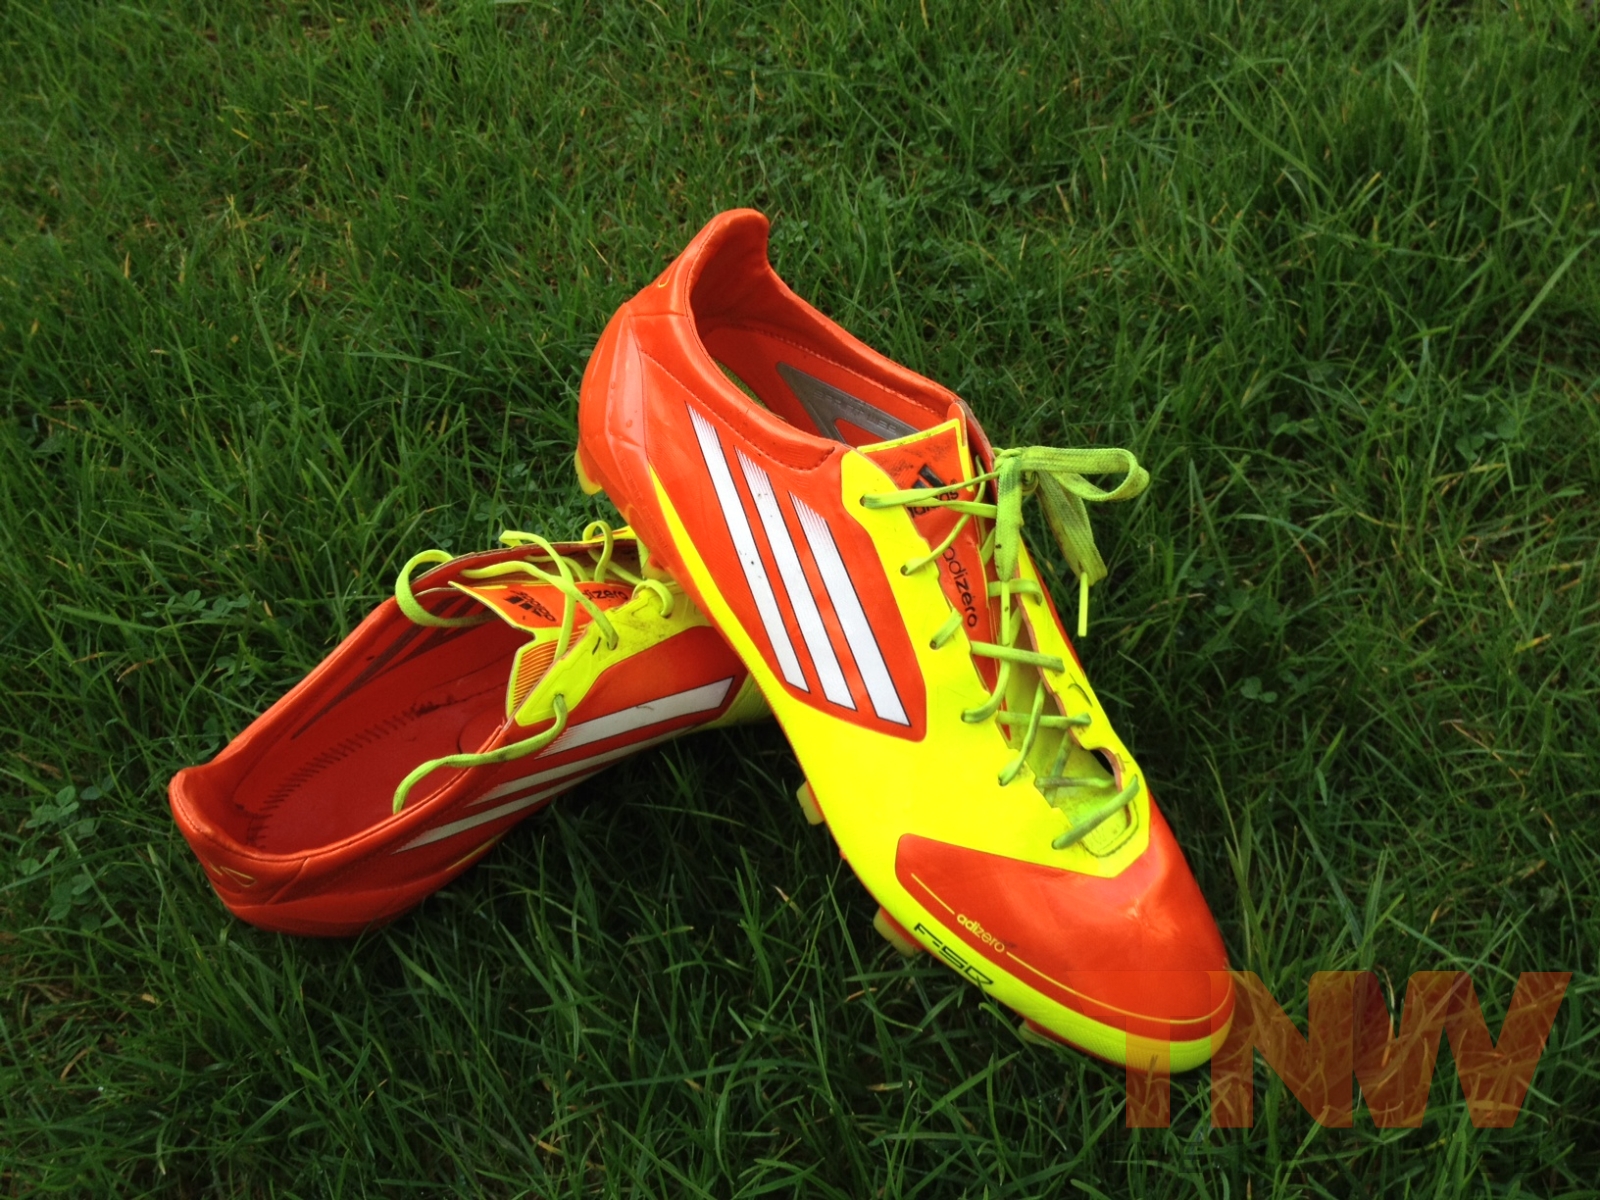 Adidas Refers To The Adizero F50 Boot As Its Groundbreaking Wallpaper & Background Download